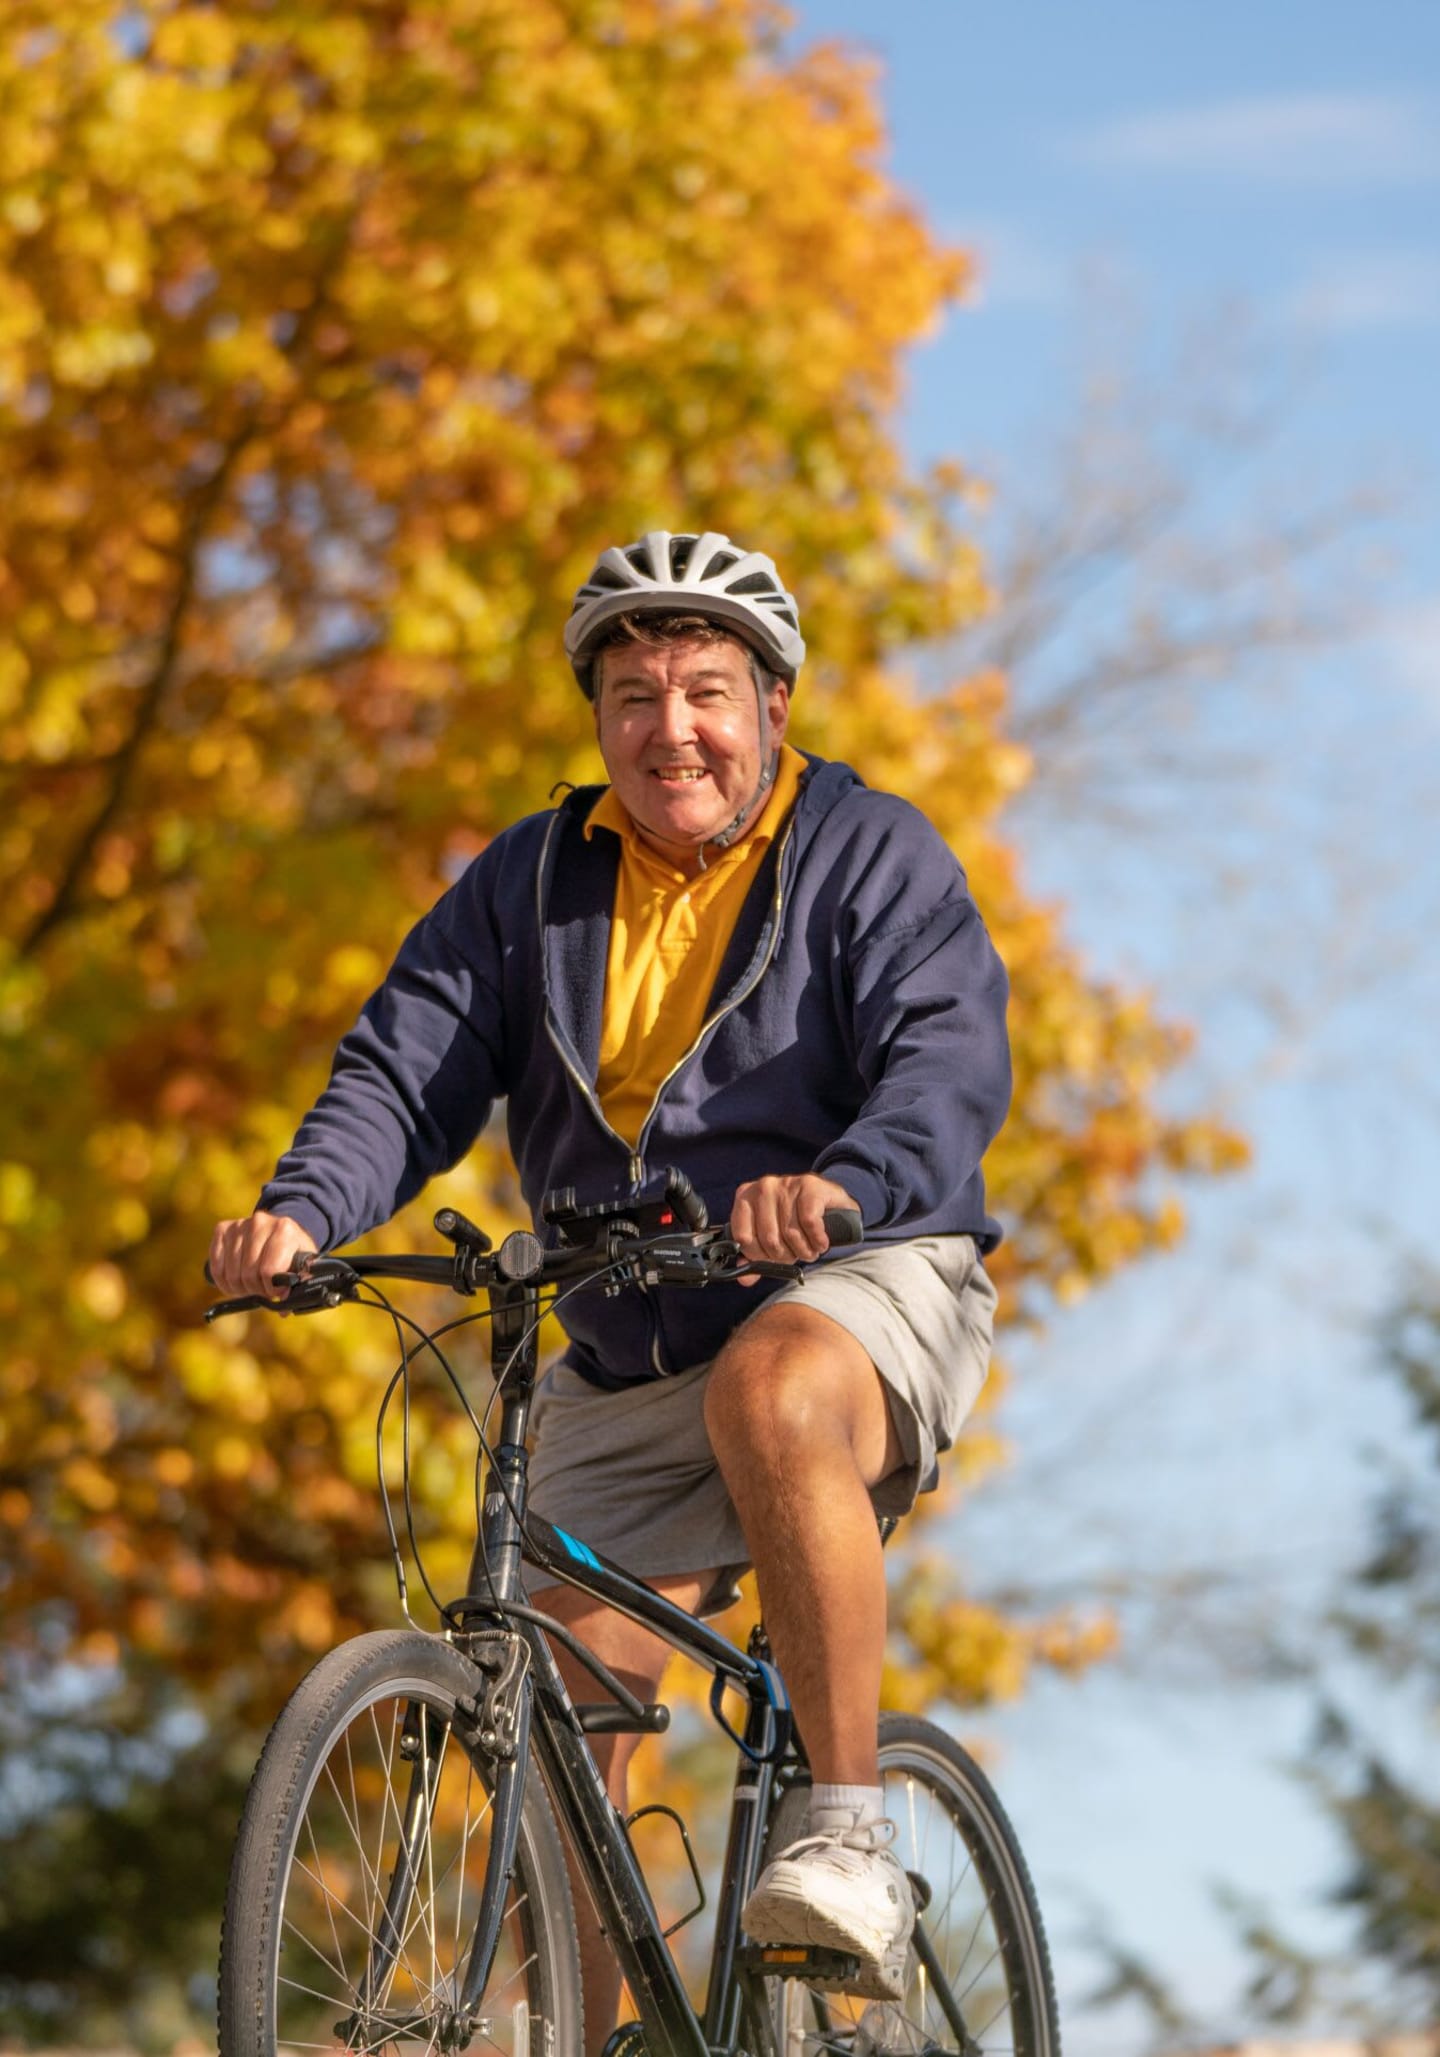 Knee replacement surgery let Greg get back to riding his bicycle